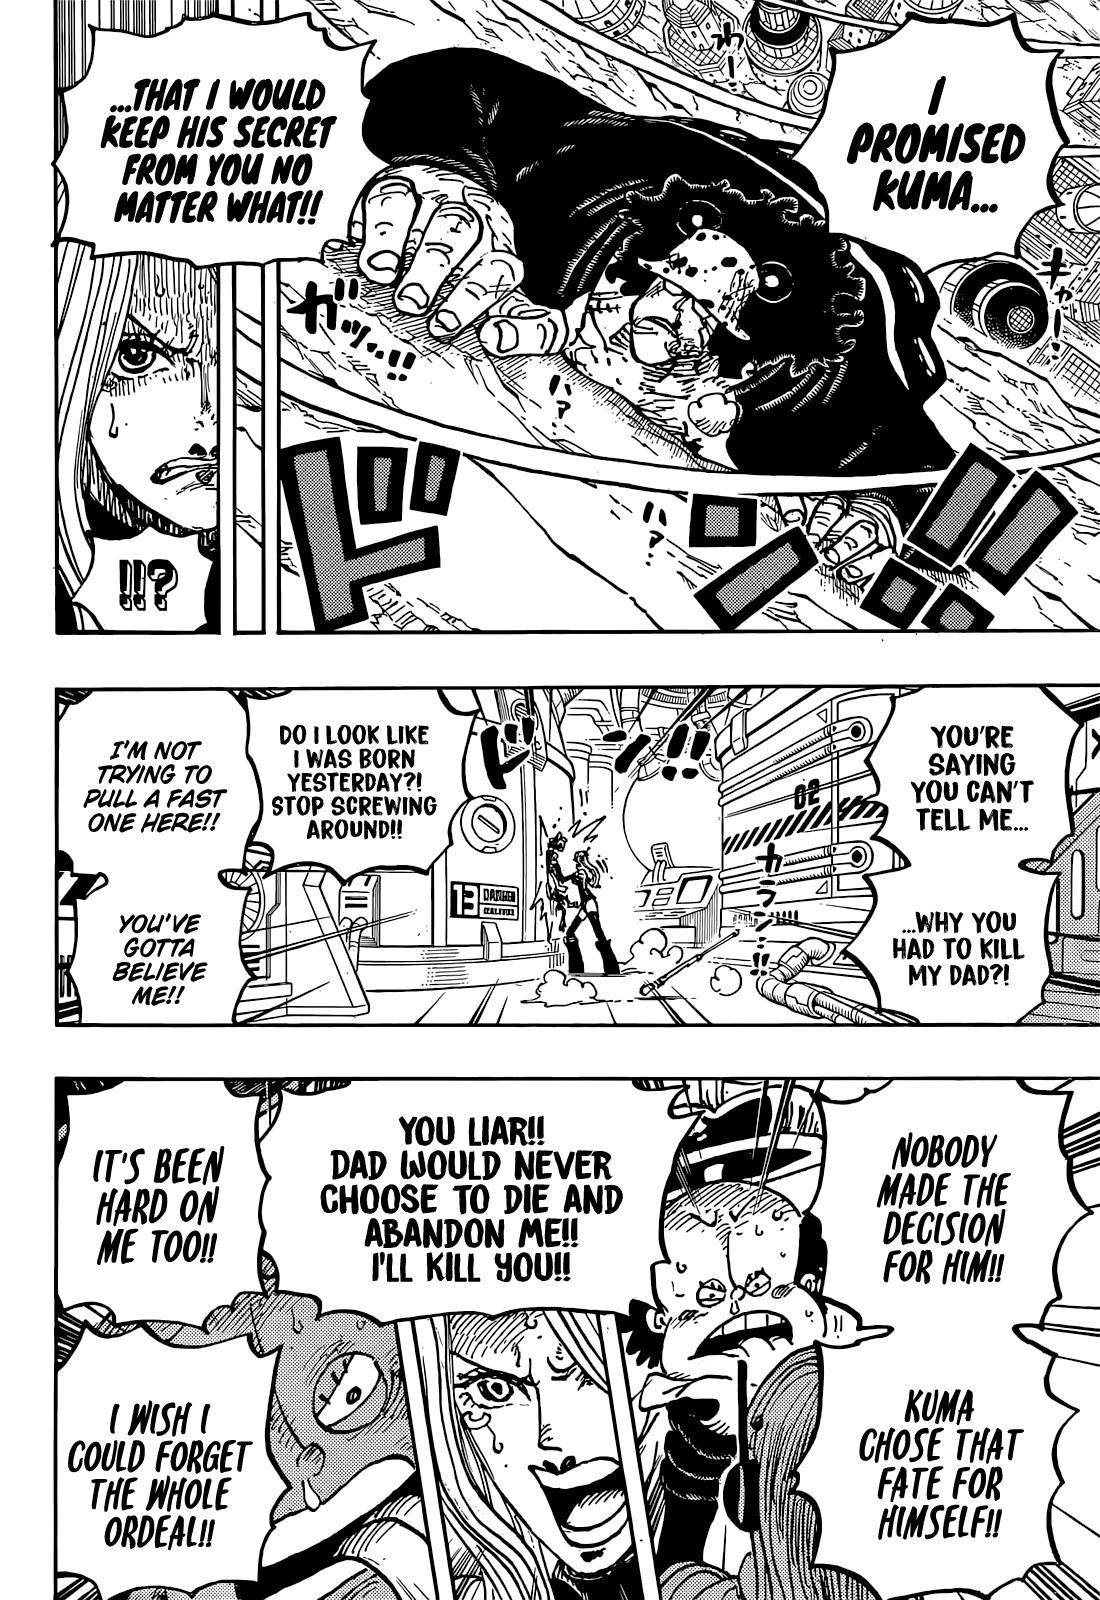 Read One Piece Chapter 1072 6